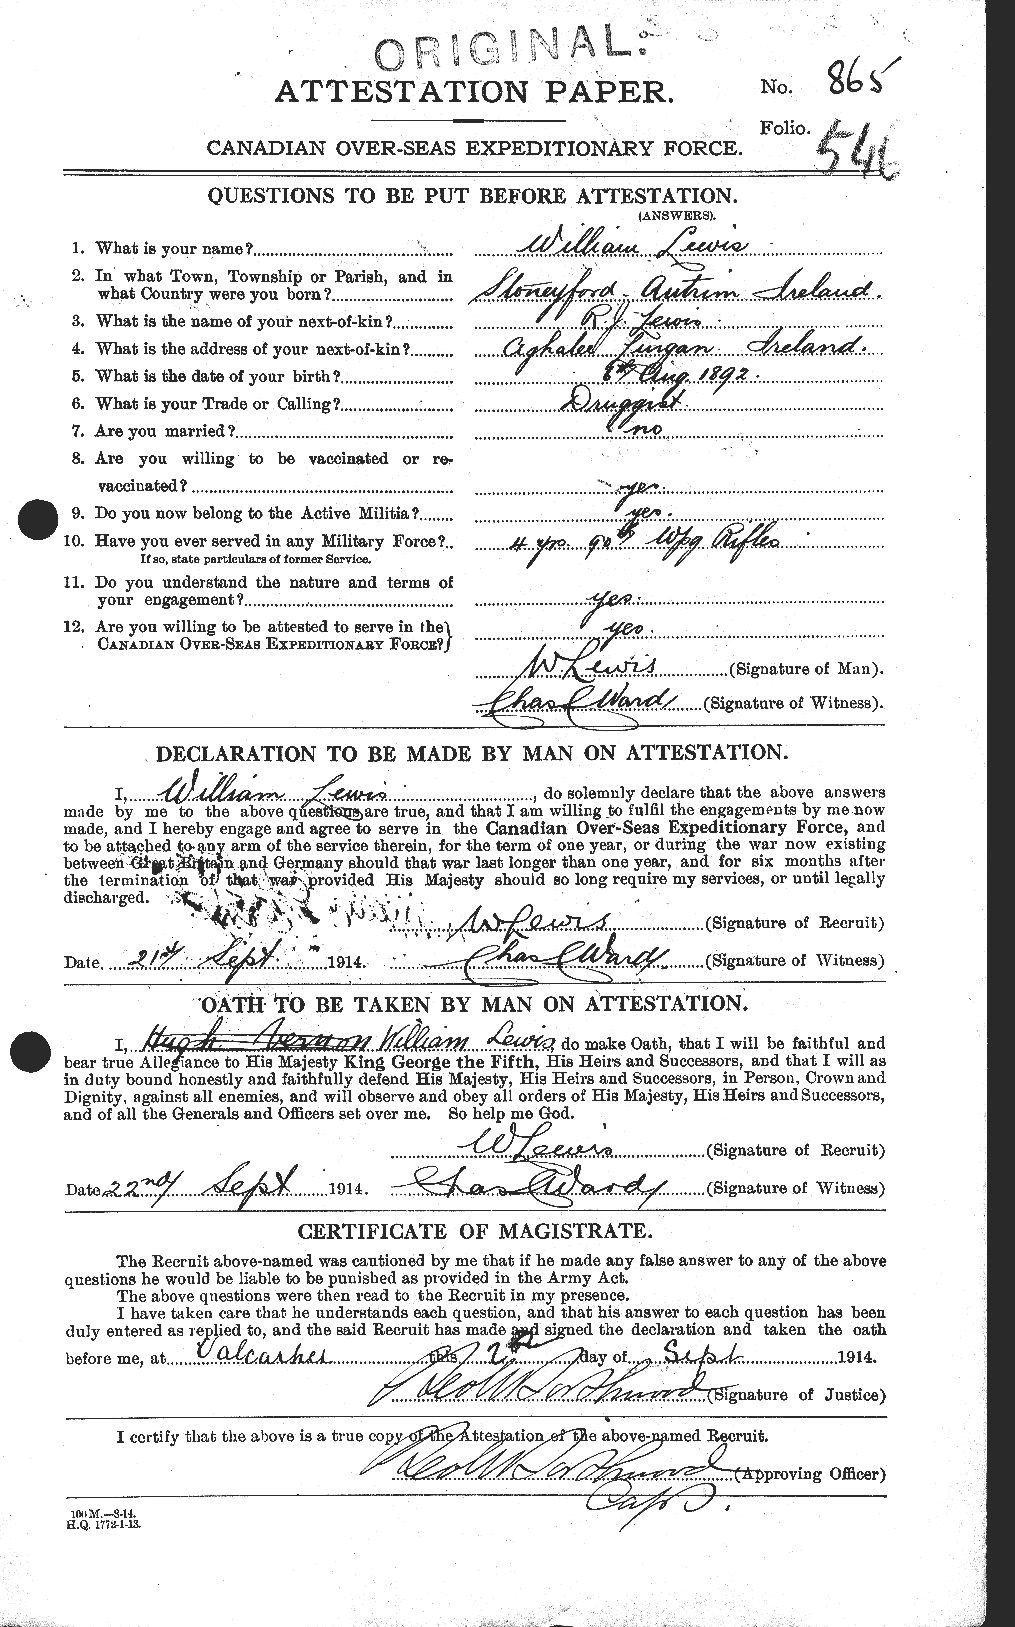 Personnel Records of the First World War - CEF 464061a